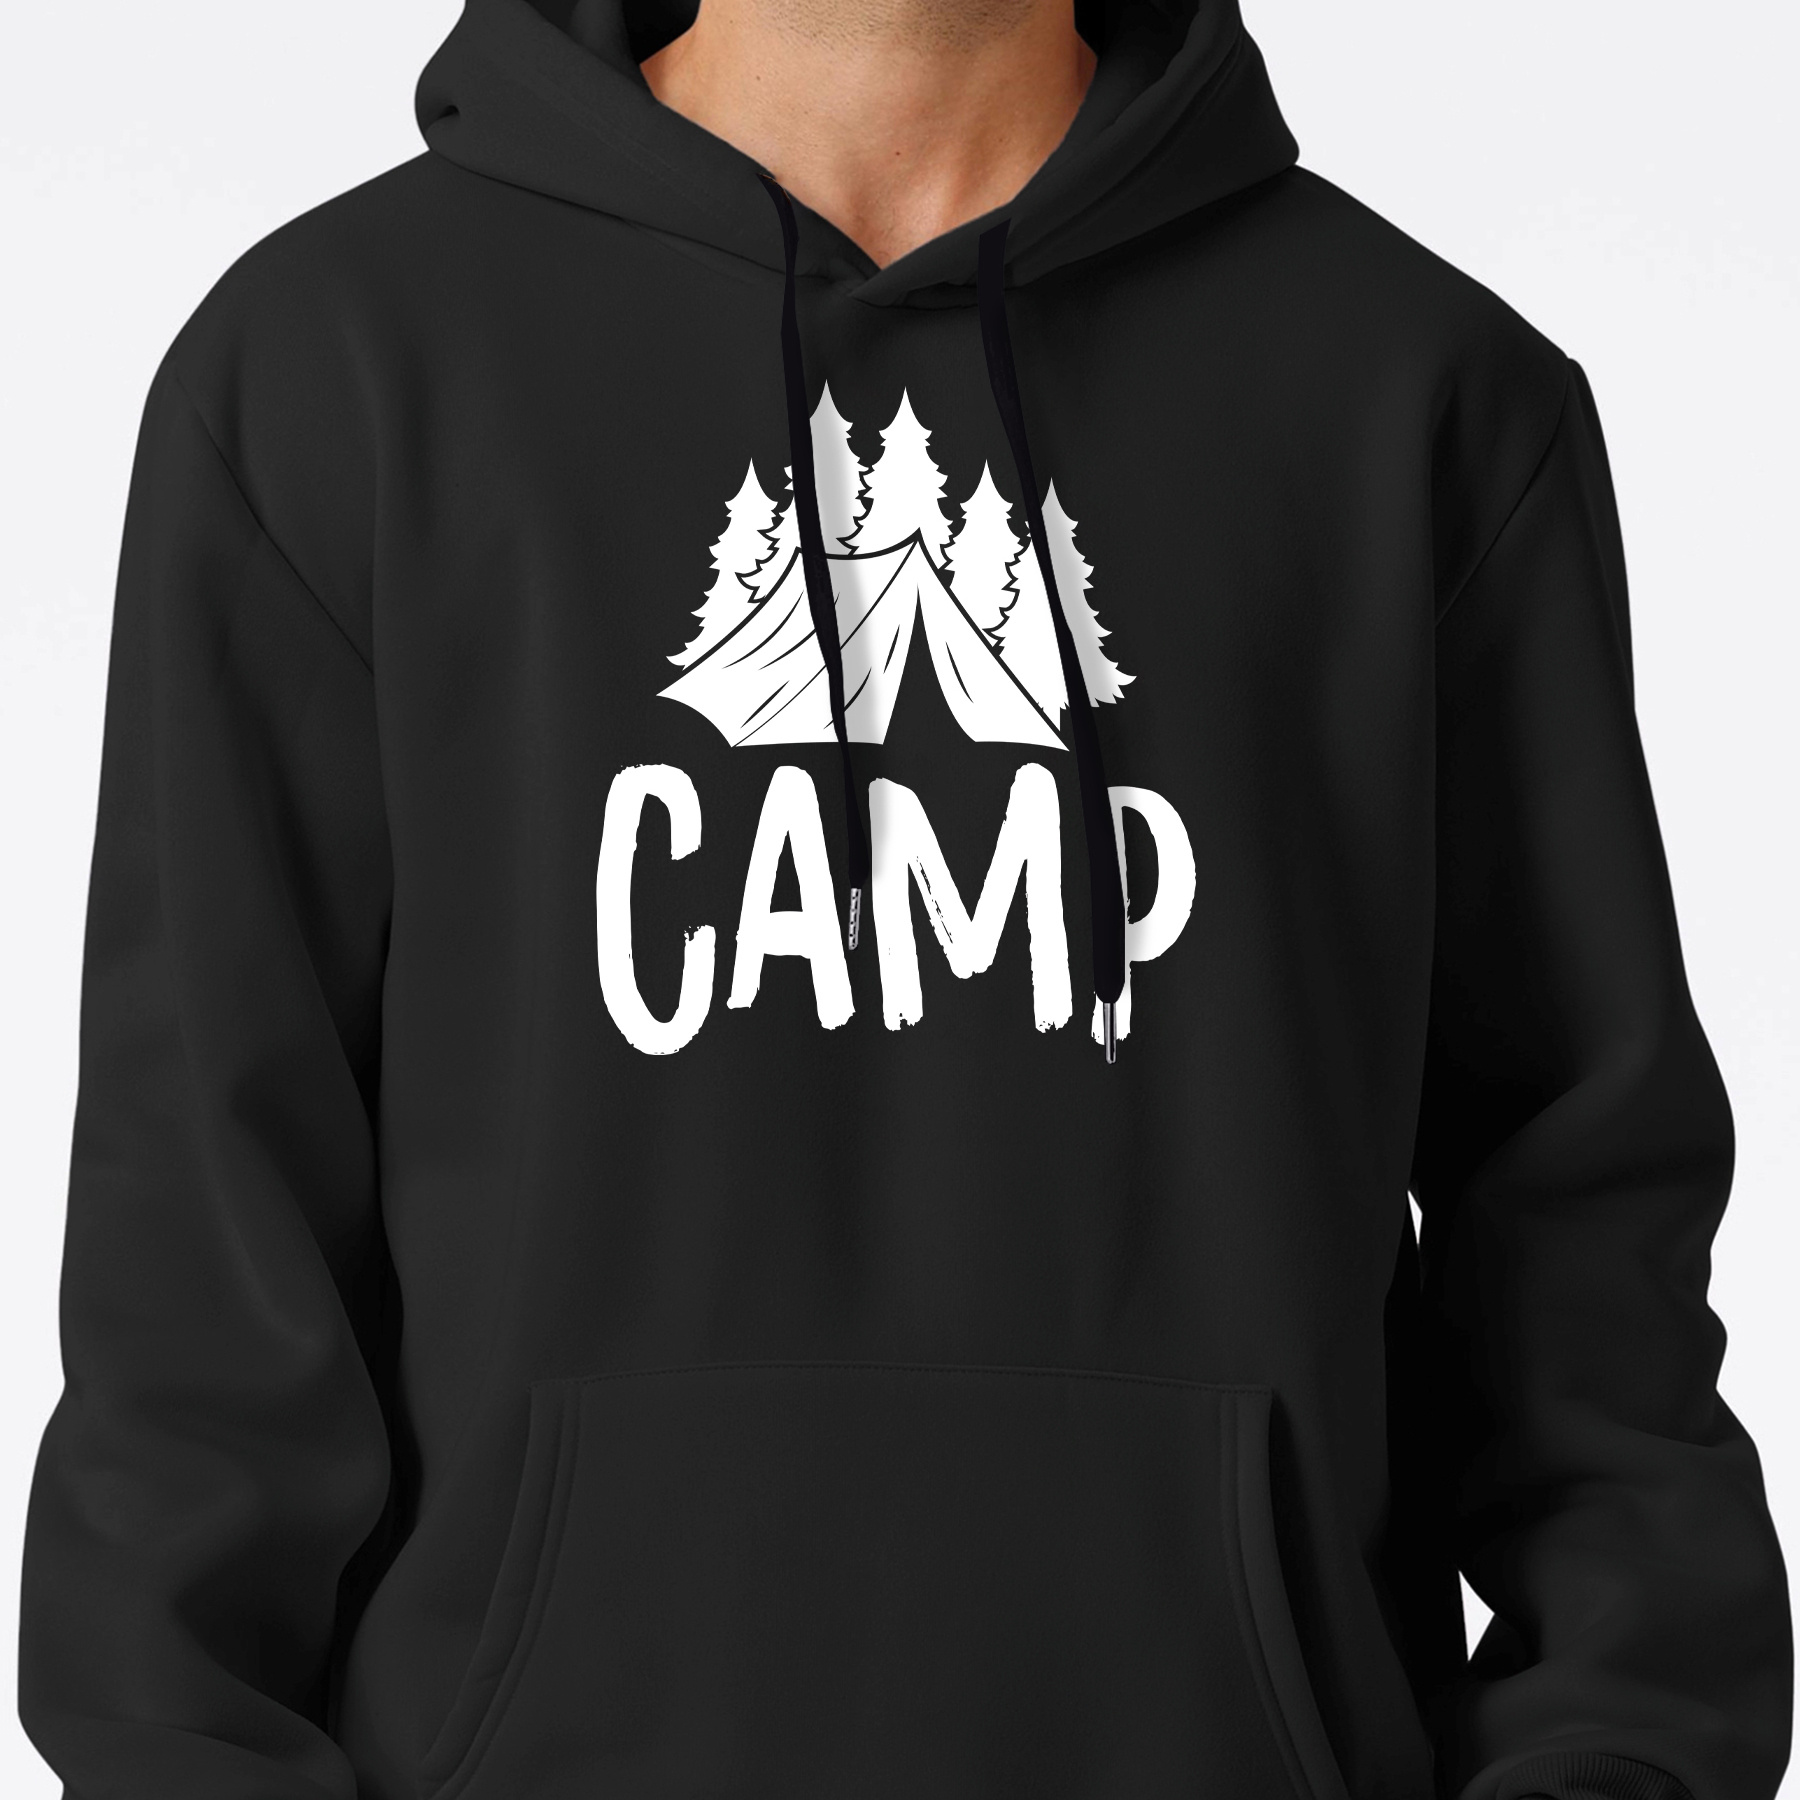 

Camp And Forest Graphic Print Sweatshirt, Artistic Graphic Design Hoodies With Fleece For Men, Men's Warm Slightly Flex Hooded Streetwear Pullover, For Fall And Winter, As Gifts